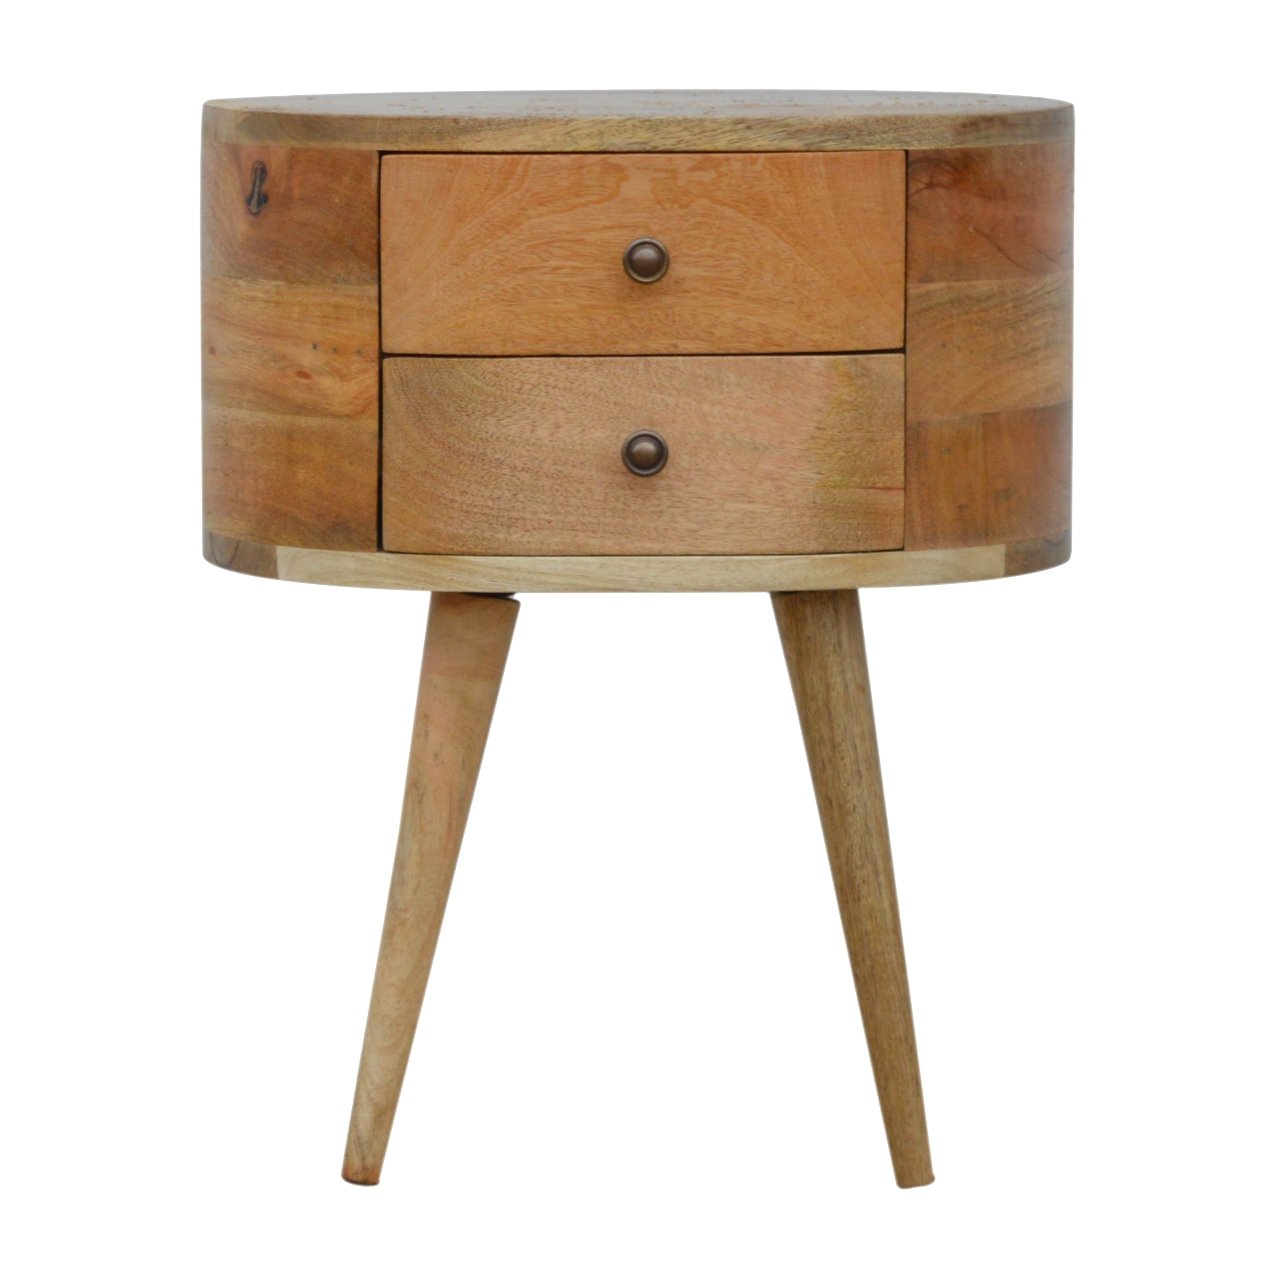 Rounded Bedside Table